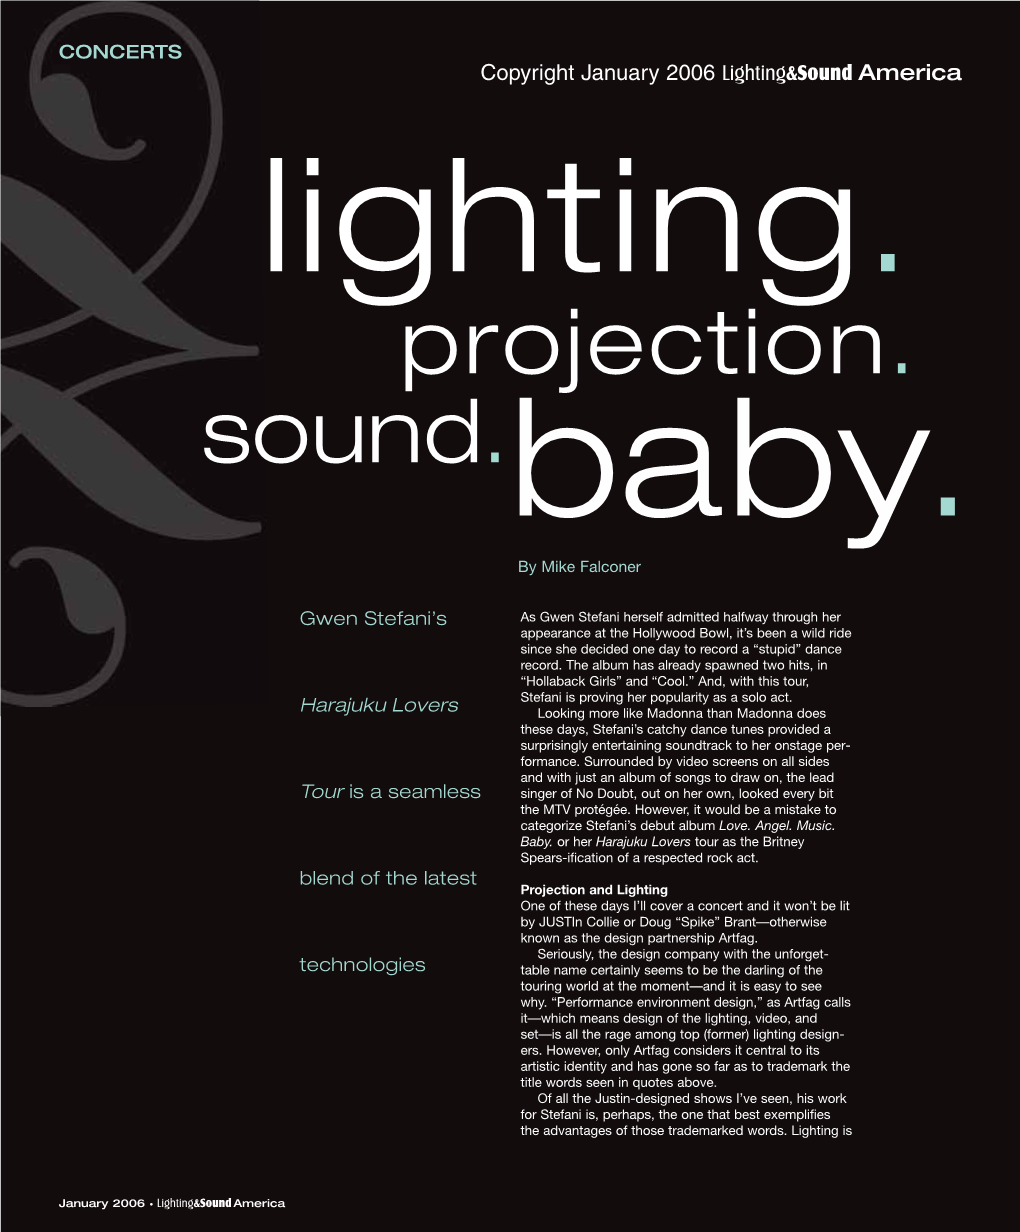 Projection. Sound.Baby